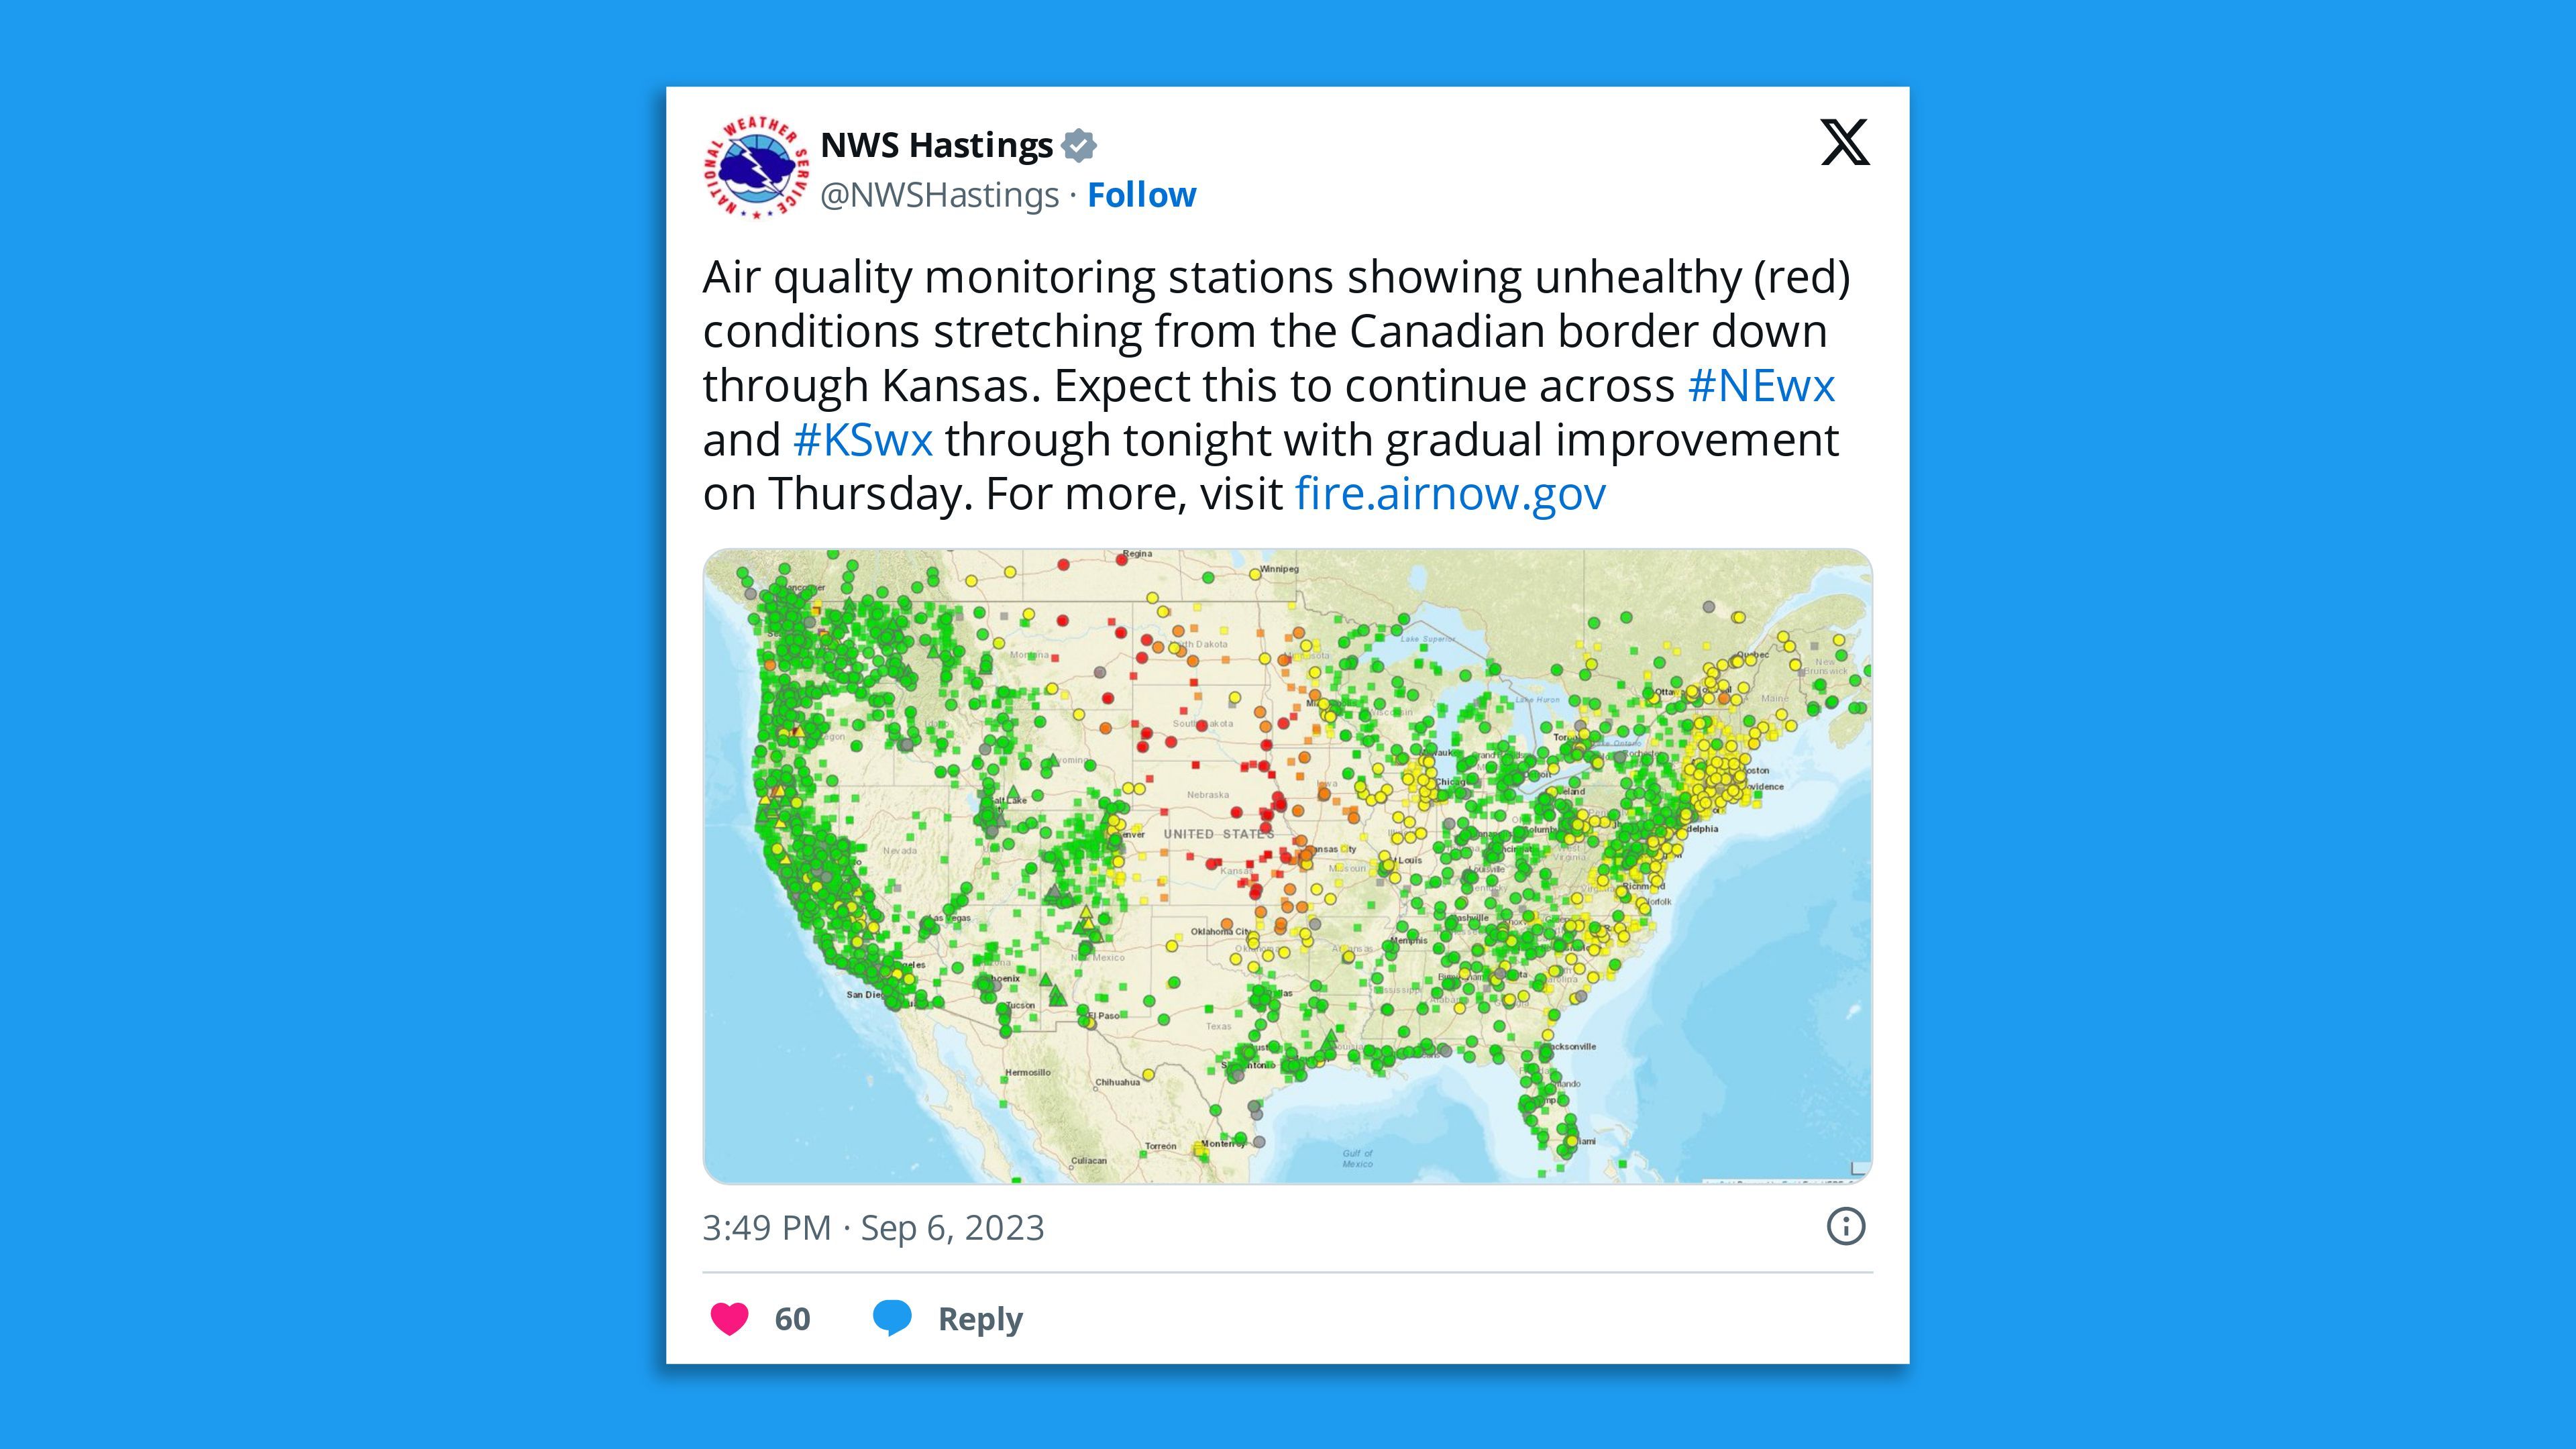 A screenshot of an NWS Hastings tweet, saying: "Air quality monitoring stations showing unhealthy (red) conditions stretching from the Canadian border down through Kansas. Expect this to continue across #NEwx and #KSwx through tonight with gradual improvement on Thursday. For more, visit http://fire.airnow.gov"